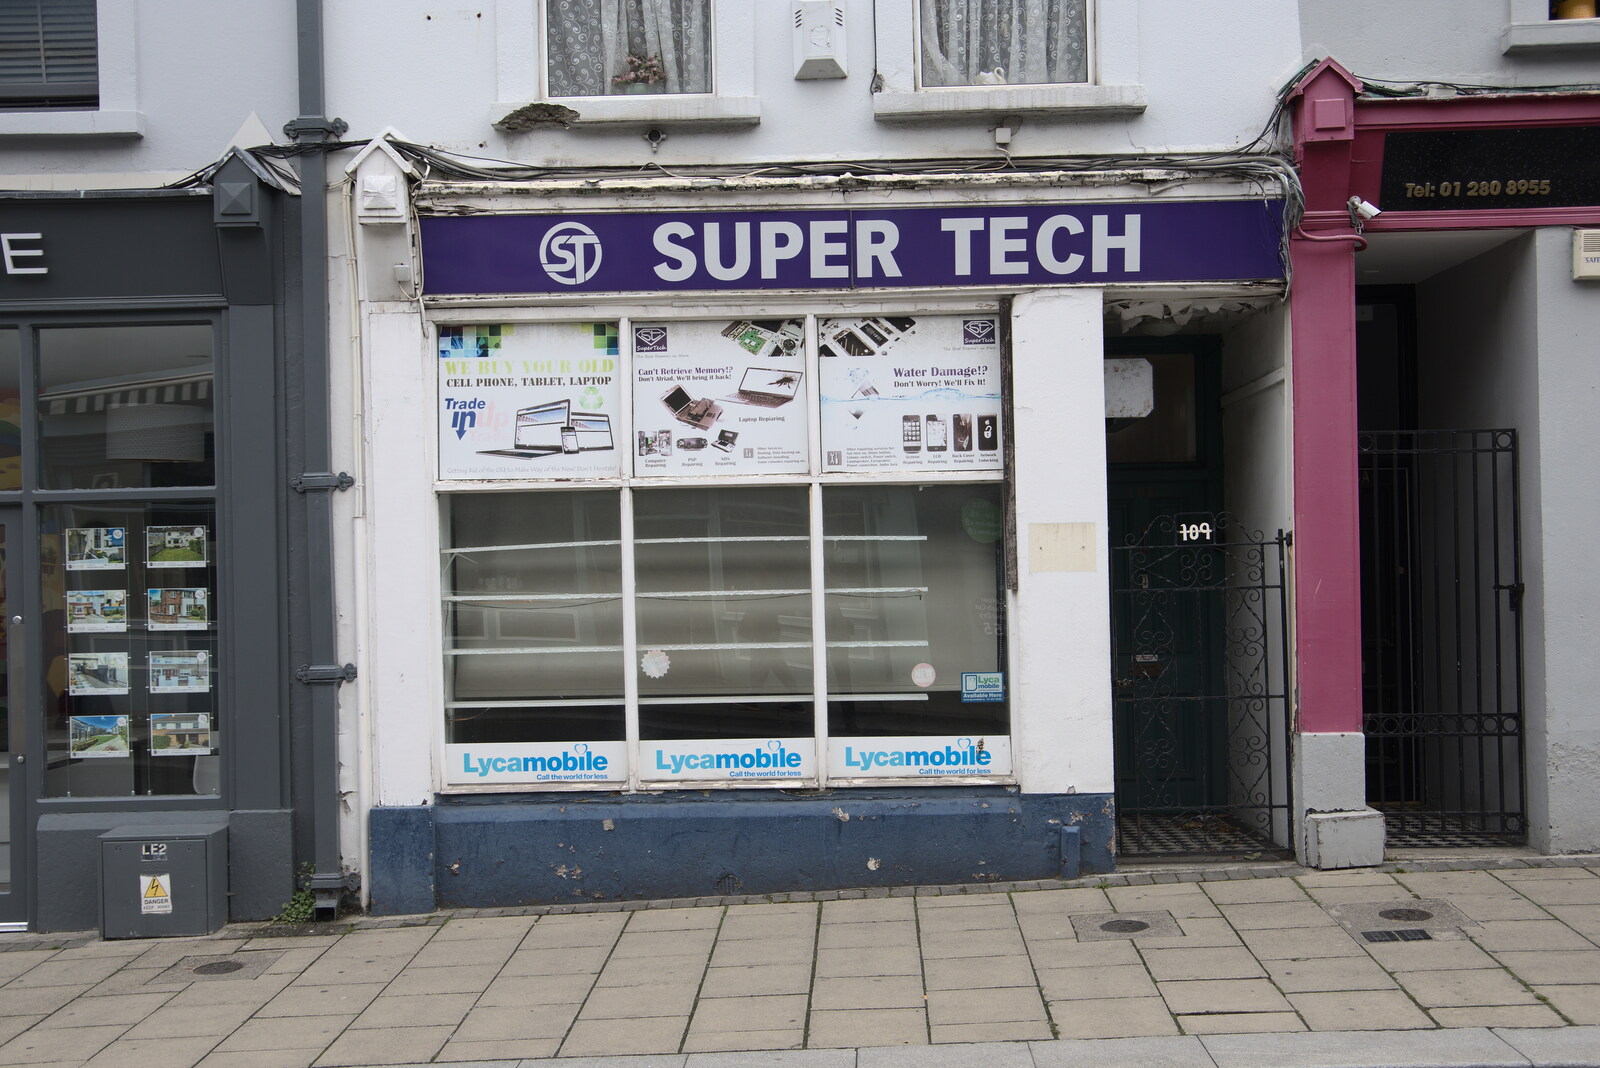 Super Tech derelict phone shop from Manorhamilton and the Street Art of Dún Laoghaire, Ireland - 15th August 2021